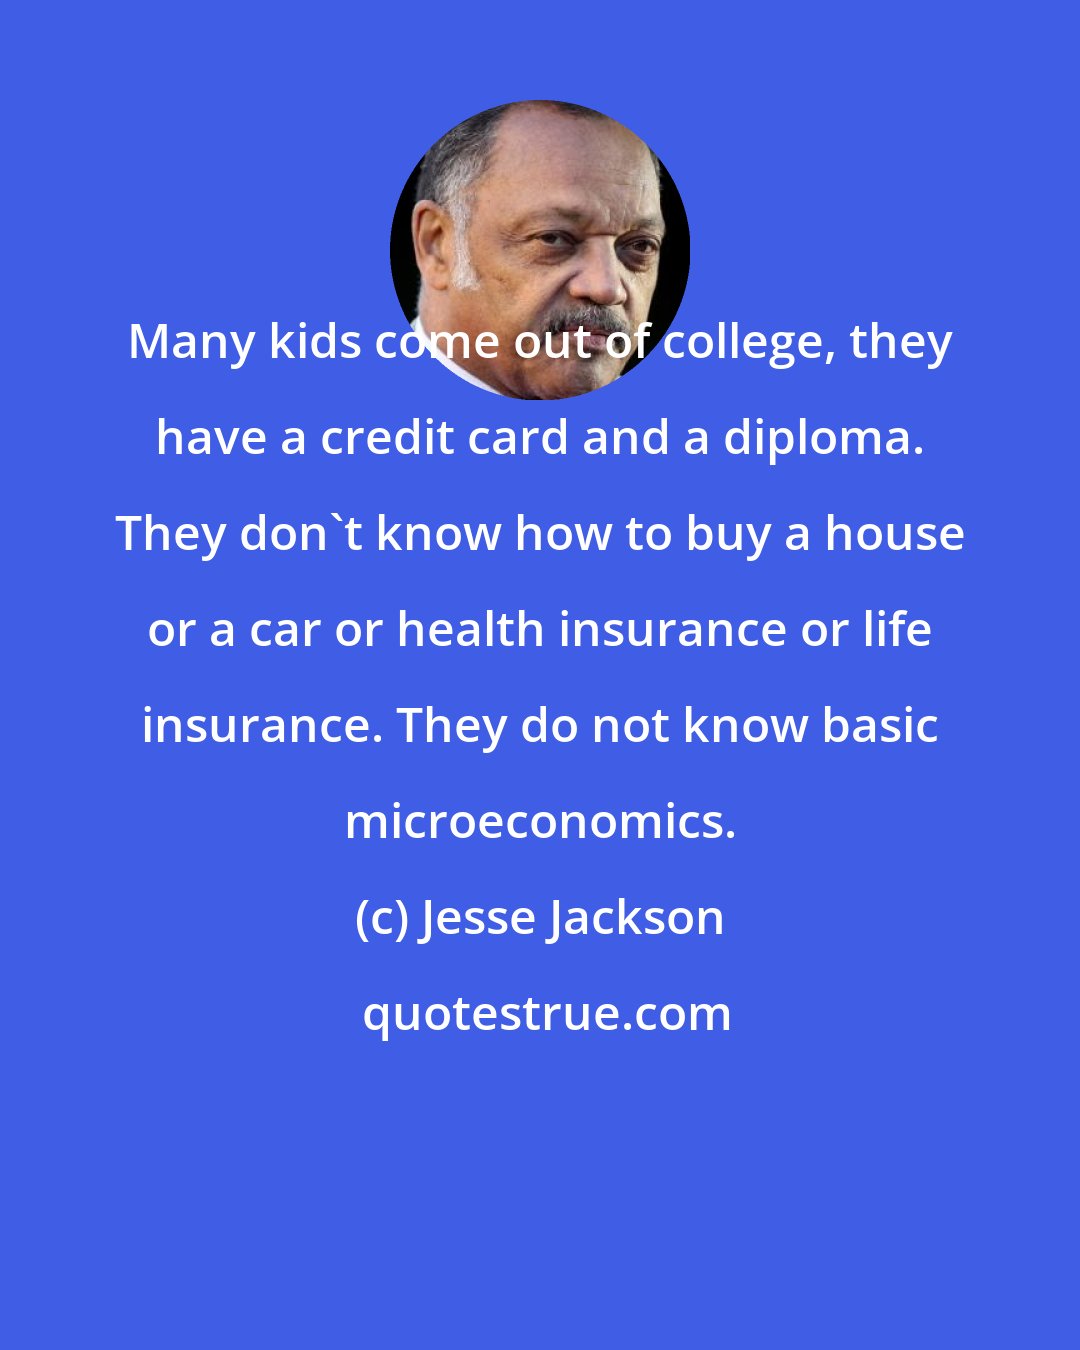 Jesse Jackson: Many kids come out of college, they have a credit card and a diploma. They don't know how to buy a house or a car or health insurance or life insurance. They do not know basic microeconomics.